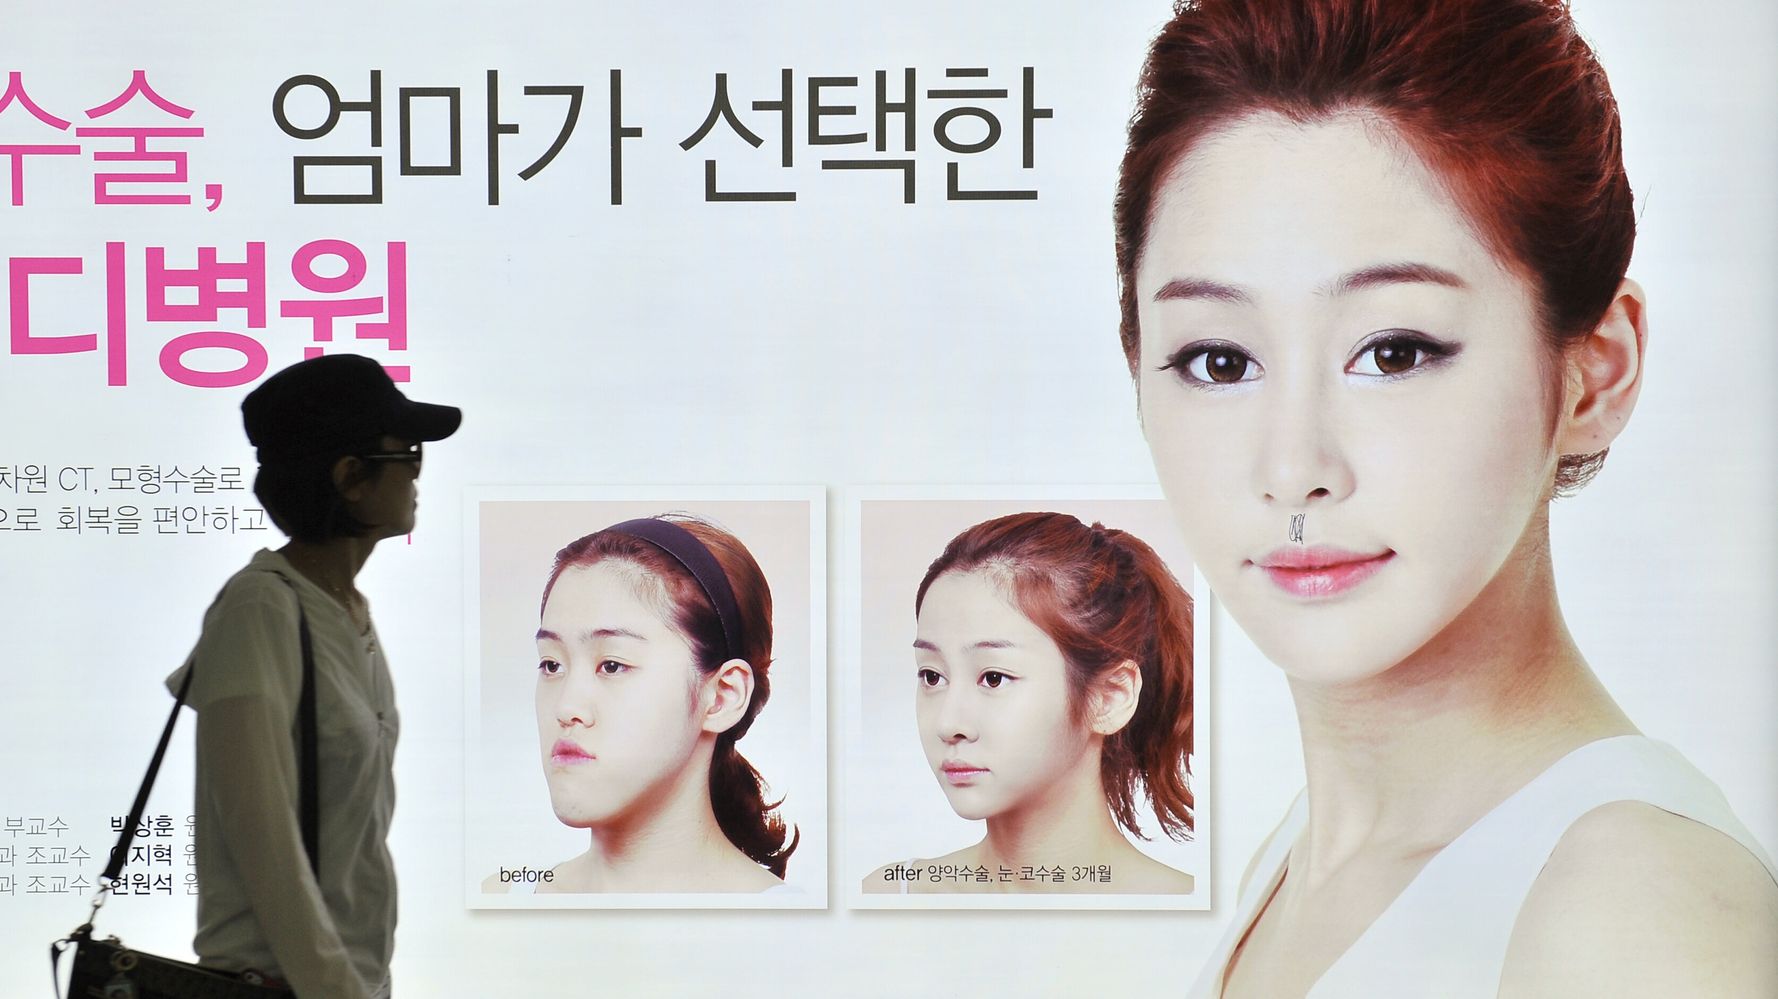 South Korea S Plastic Surgery Boom A Quest To Be Above Normal Huffpost Life